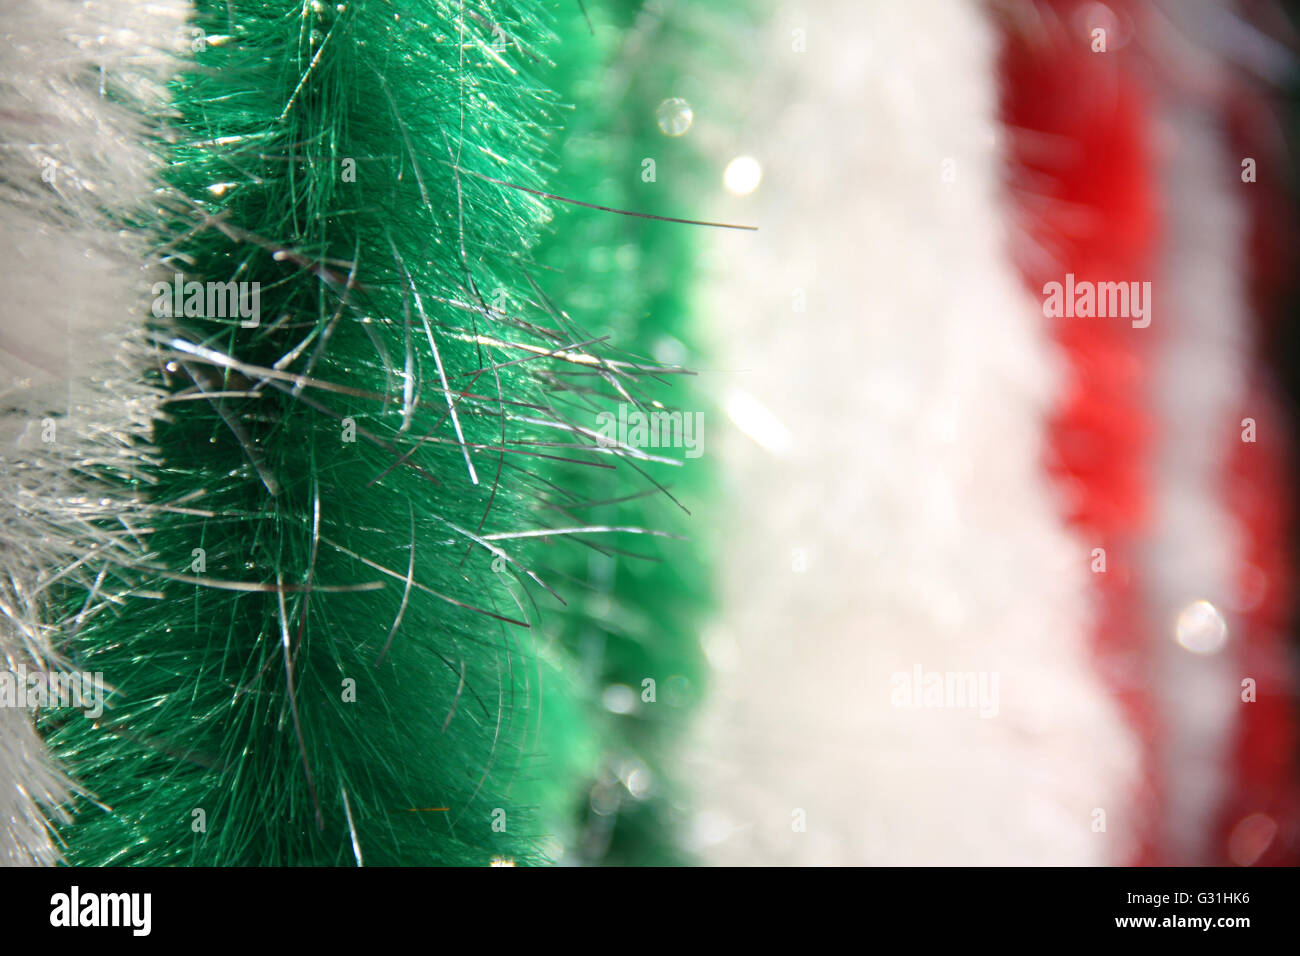 A background of colorful soft decoration frills in red, white and green colors. Stock Photo